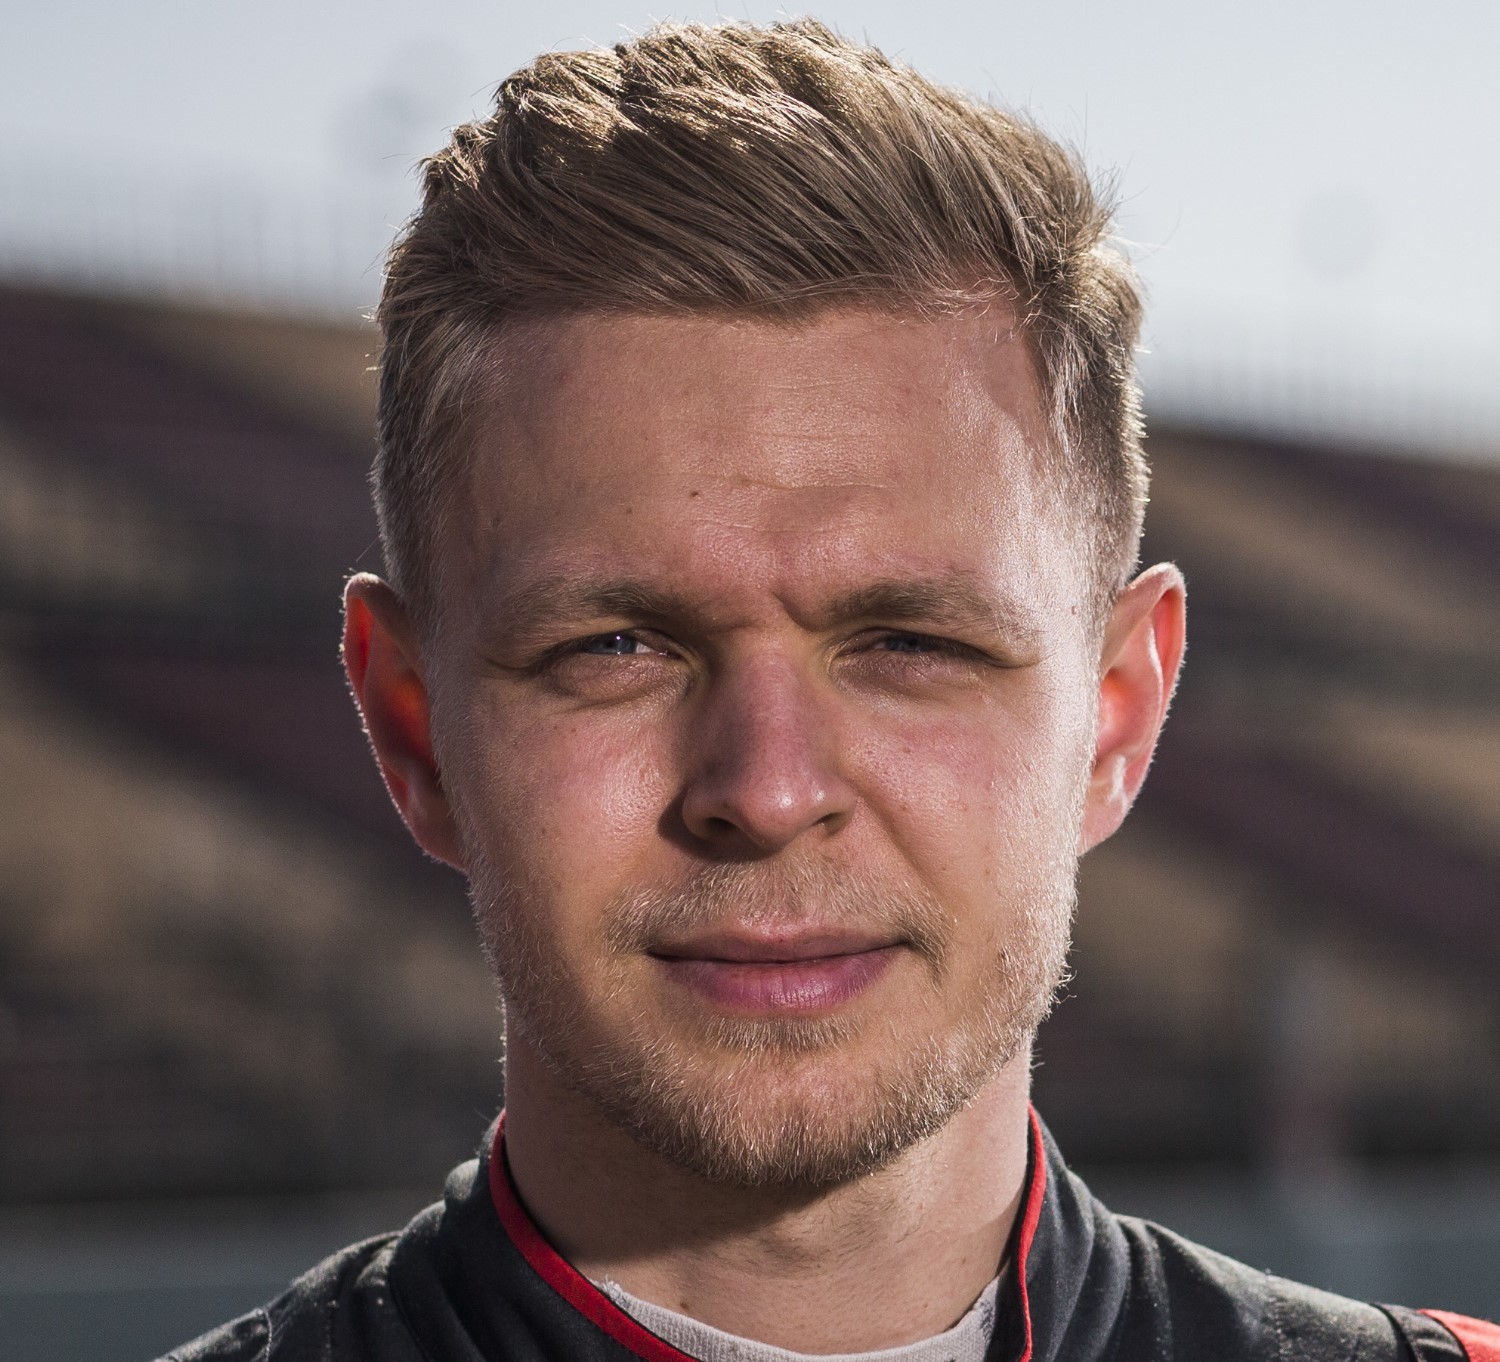 Kevin Magnussen's check wasn't big enough, team needs extra revenue Giovinazzi is paying to test